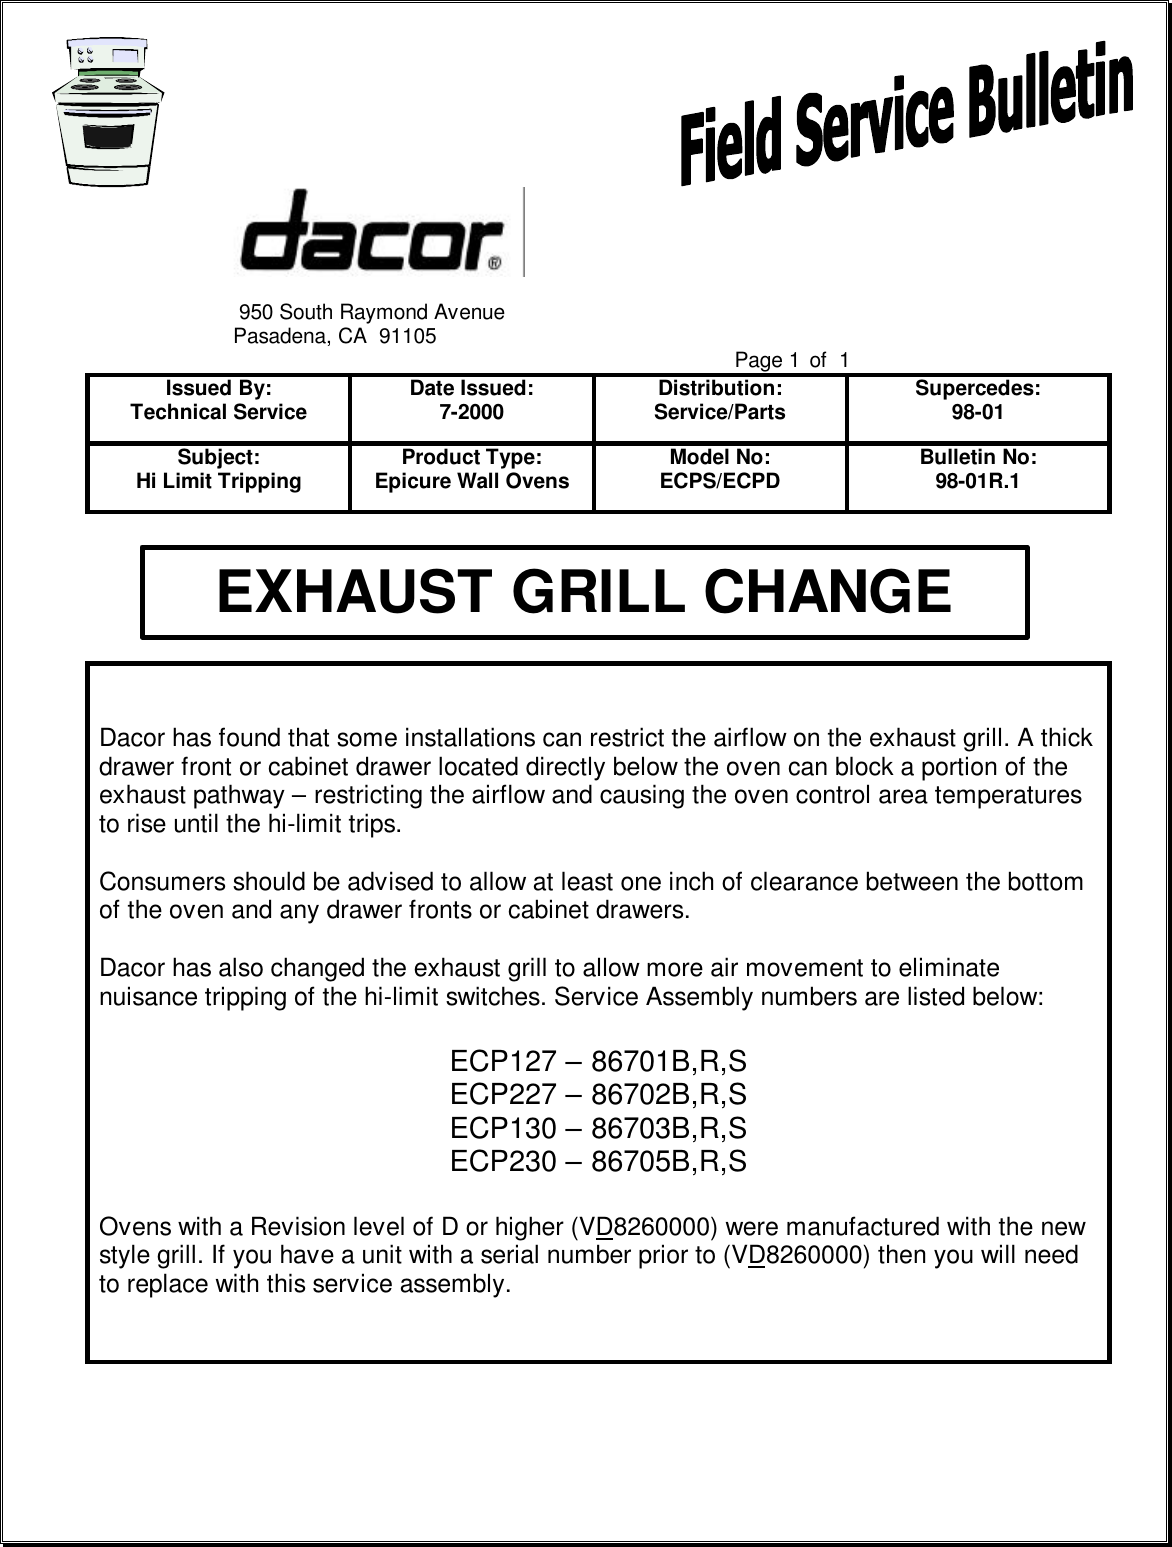 Page 2 of 11 - 1998 Field Service Bulletins  Dacor Exhaust Grill ECPS